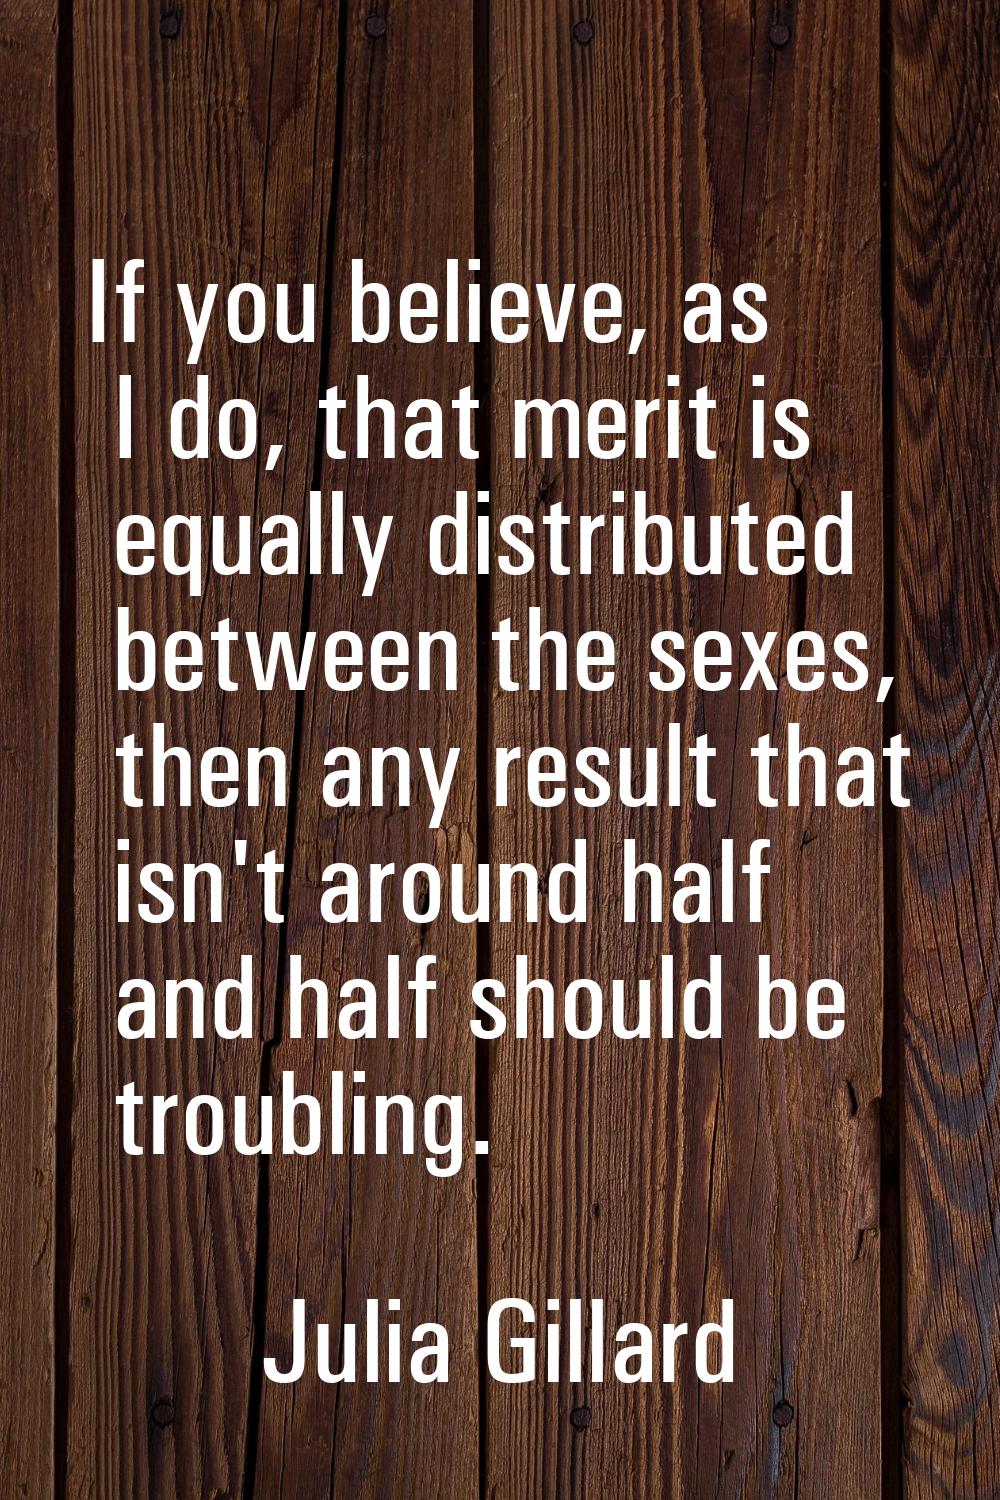 If you believe, as I do, that merit is equally distributed between the sexes, then any result that 